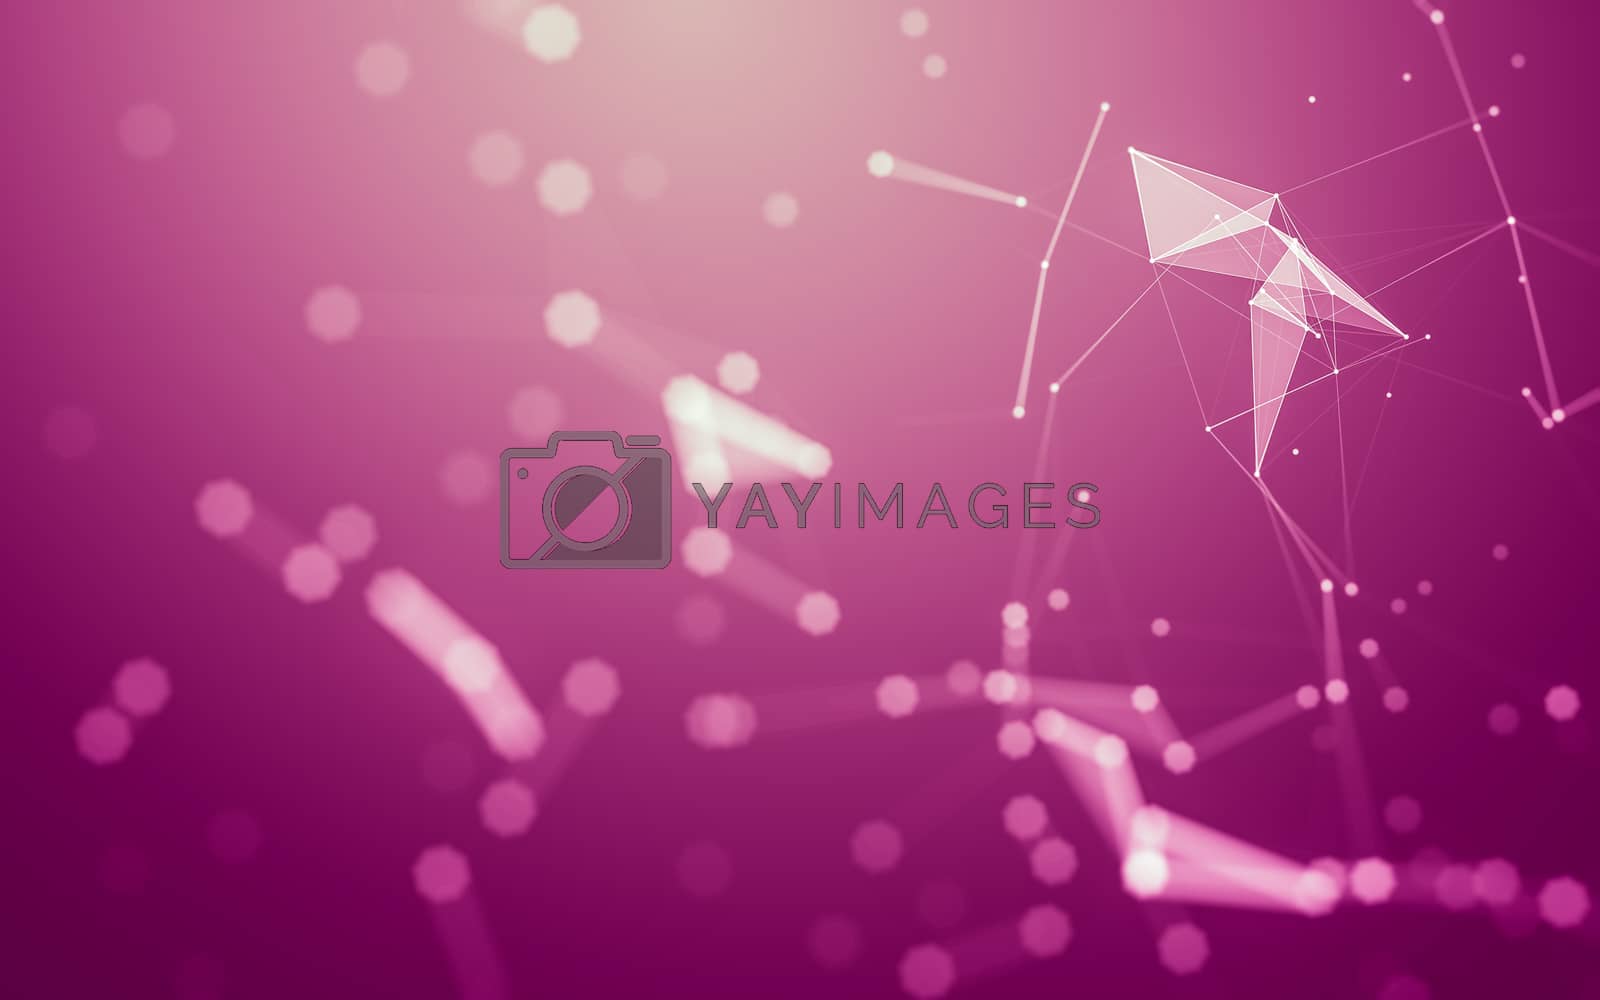 Royalty free image of Abstract polygonal space low poly dark background, 3d rendering by teerawit